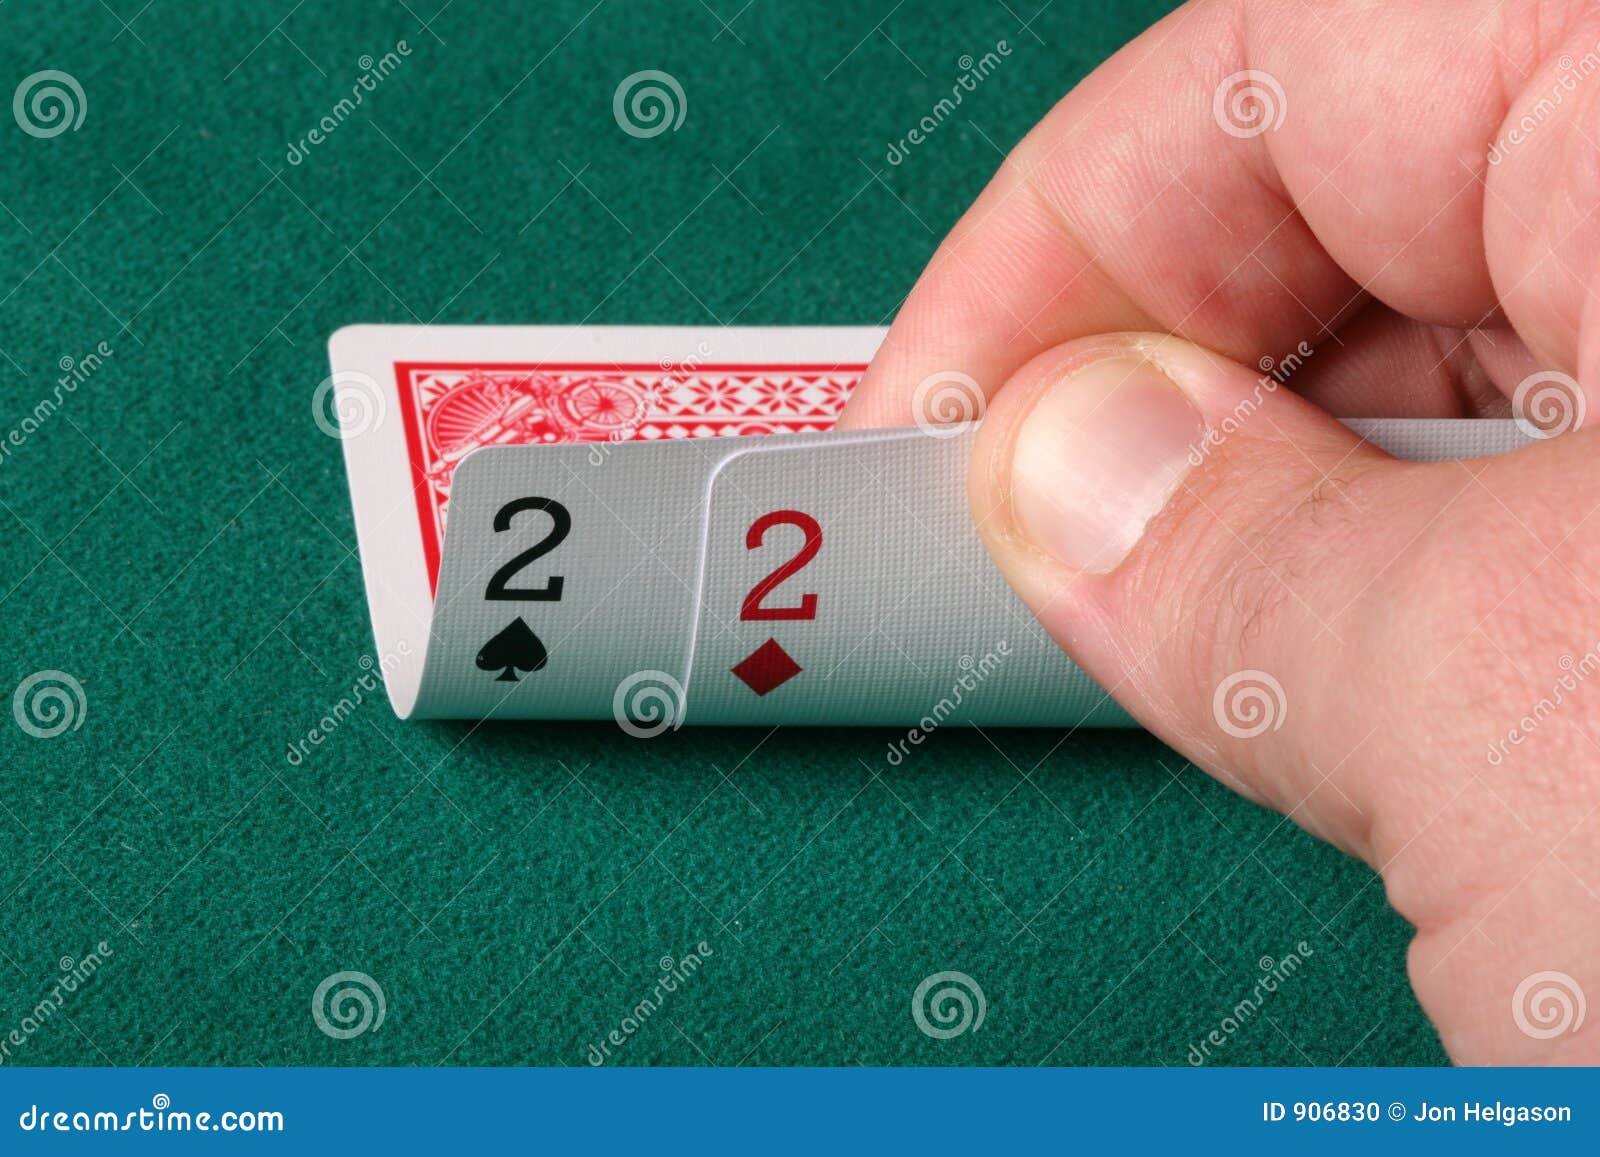 Low pocket pair stock photo. Image of hand, play, draw - 906830